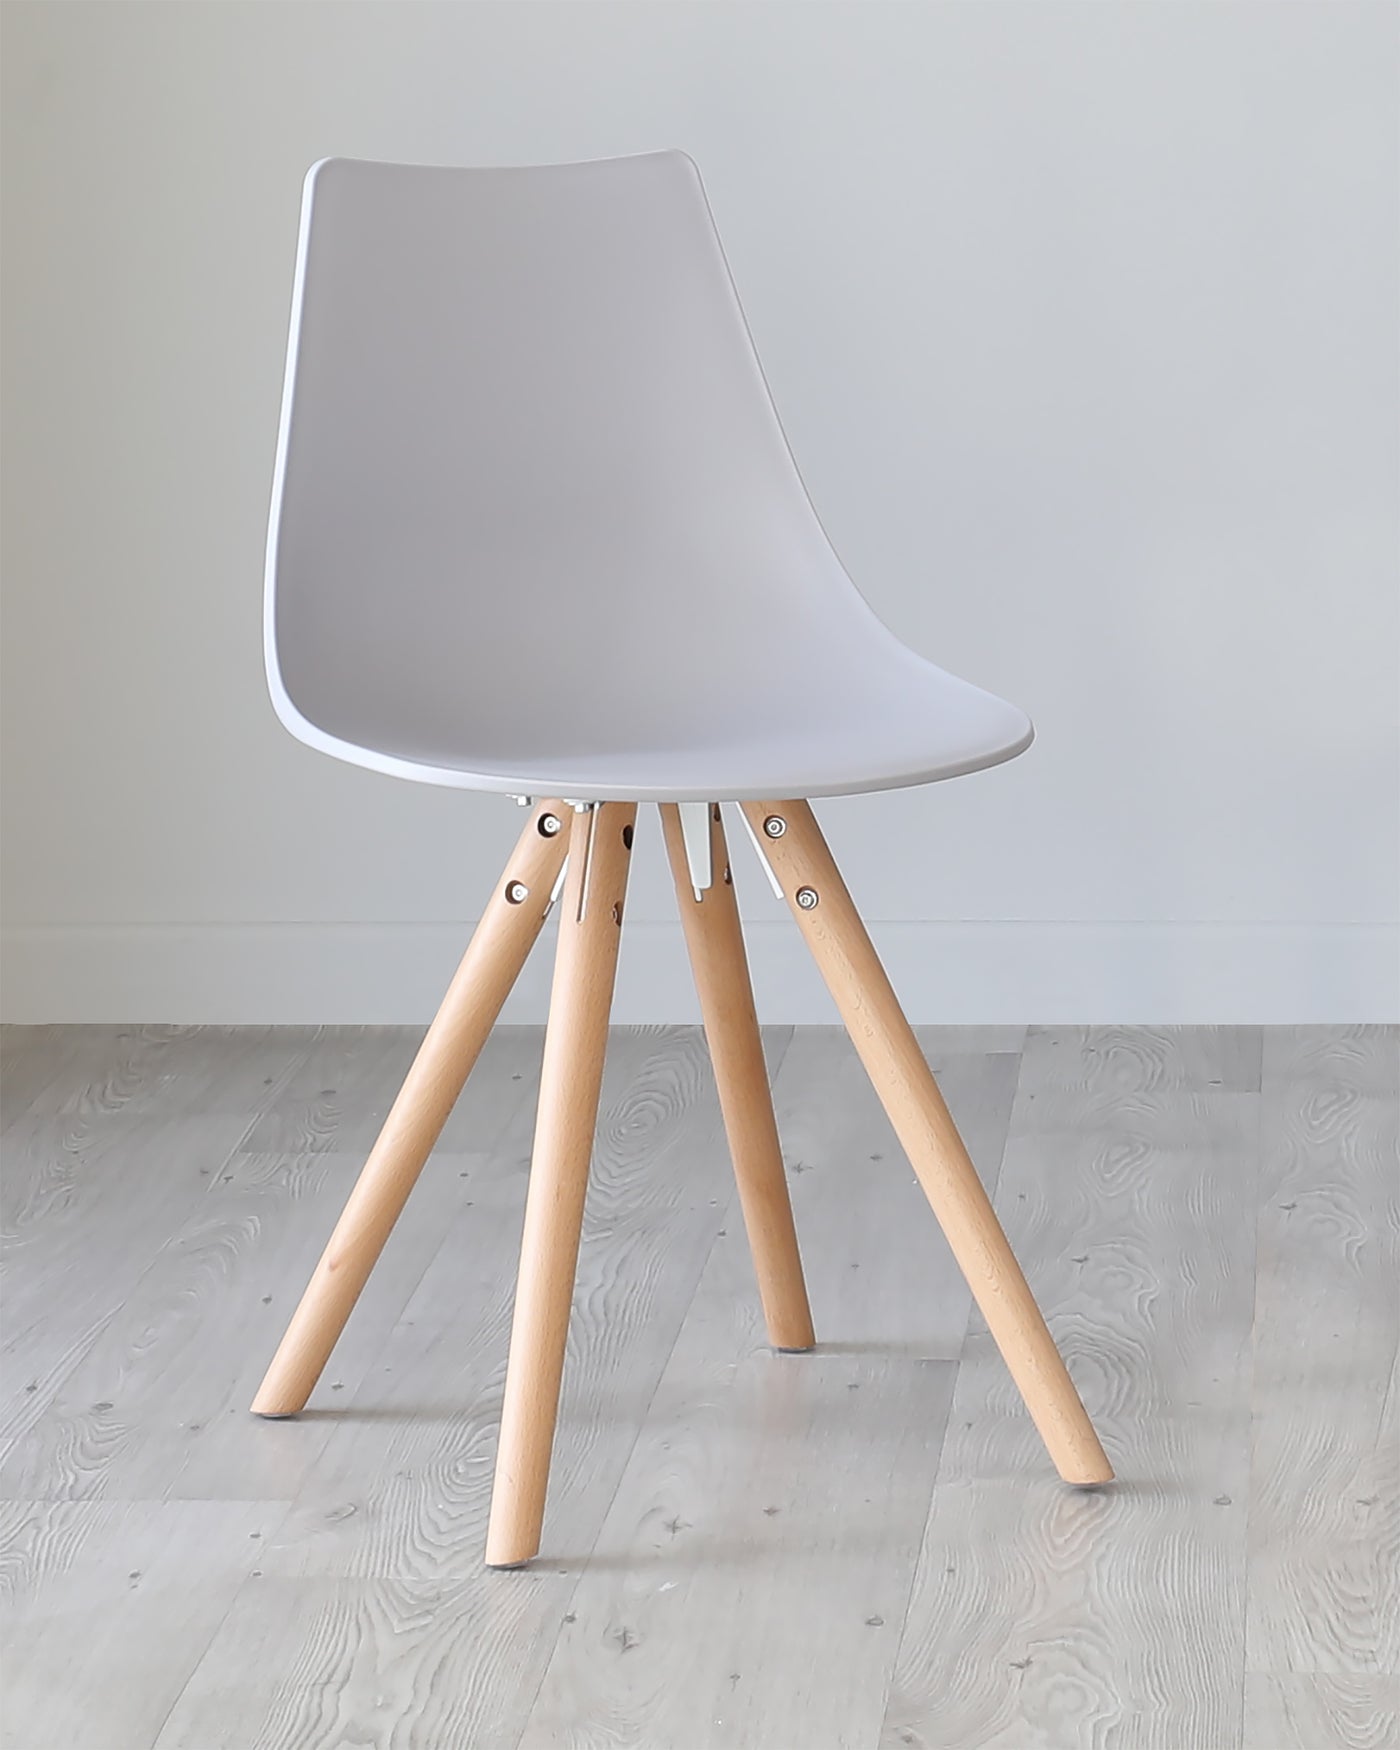 Modern minimalist chair with a white plastic seat shell and light wooden legs connected by metallic brackets, set against a plain wall on a light wooden floor.